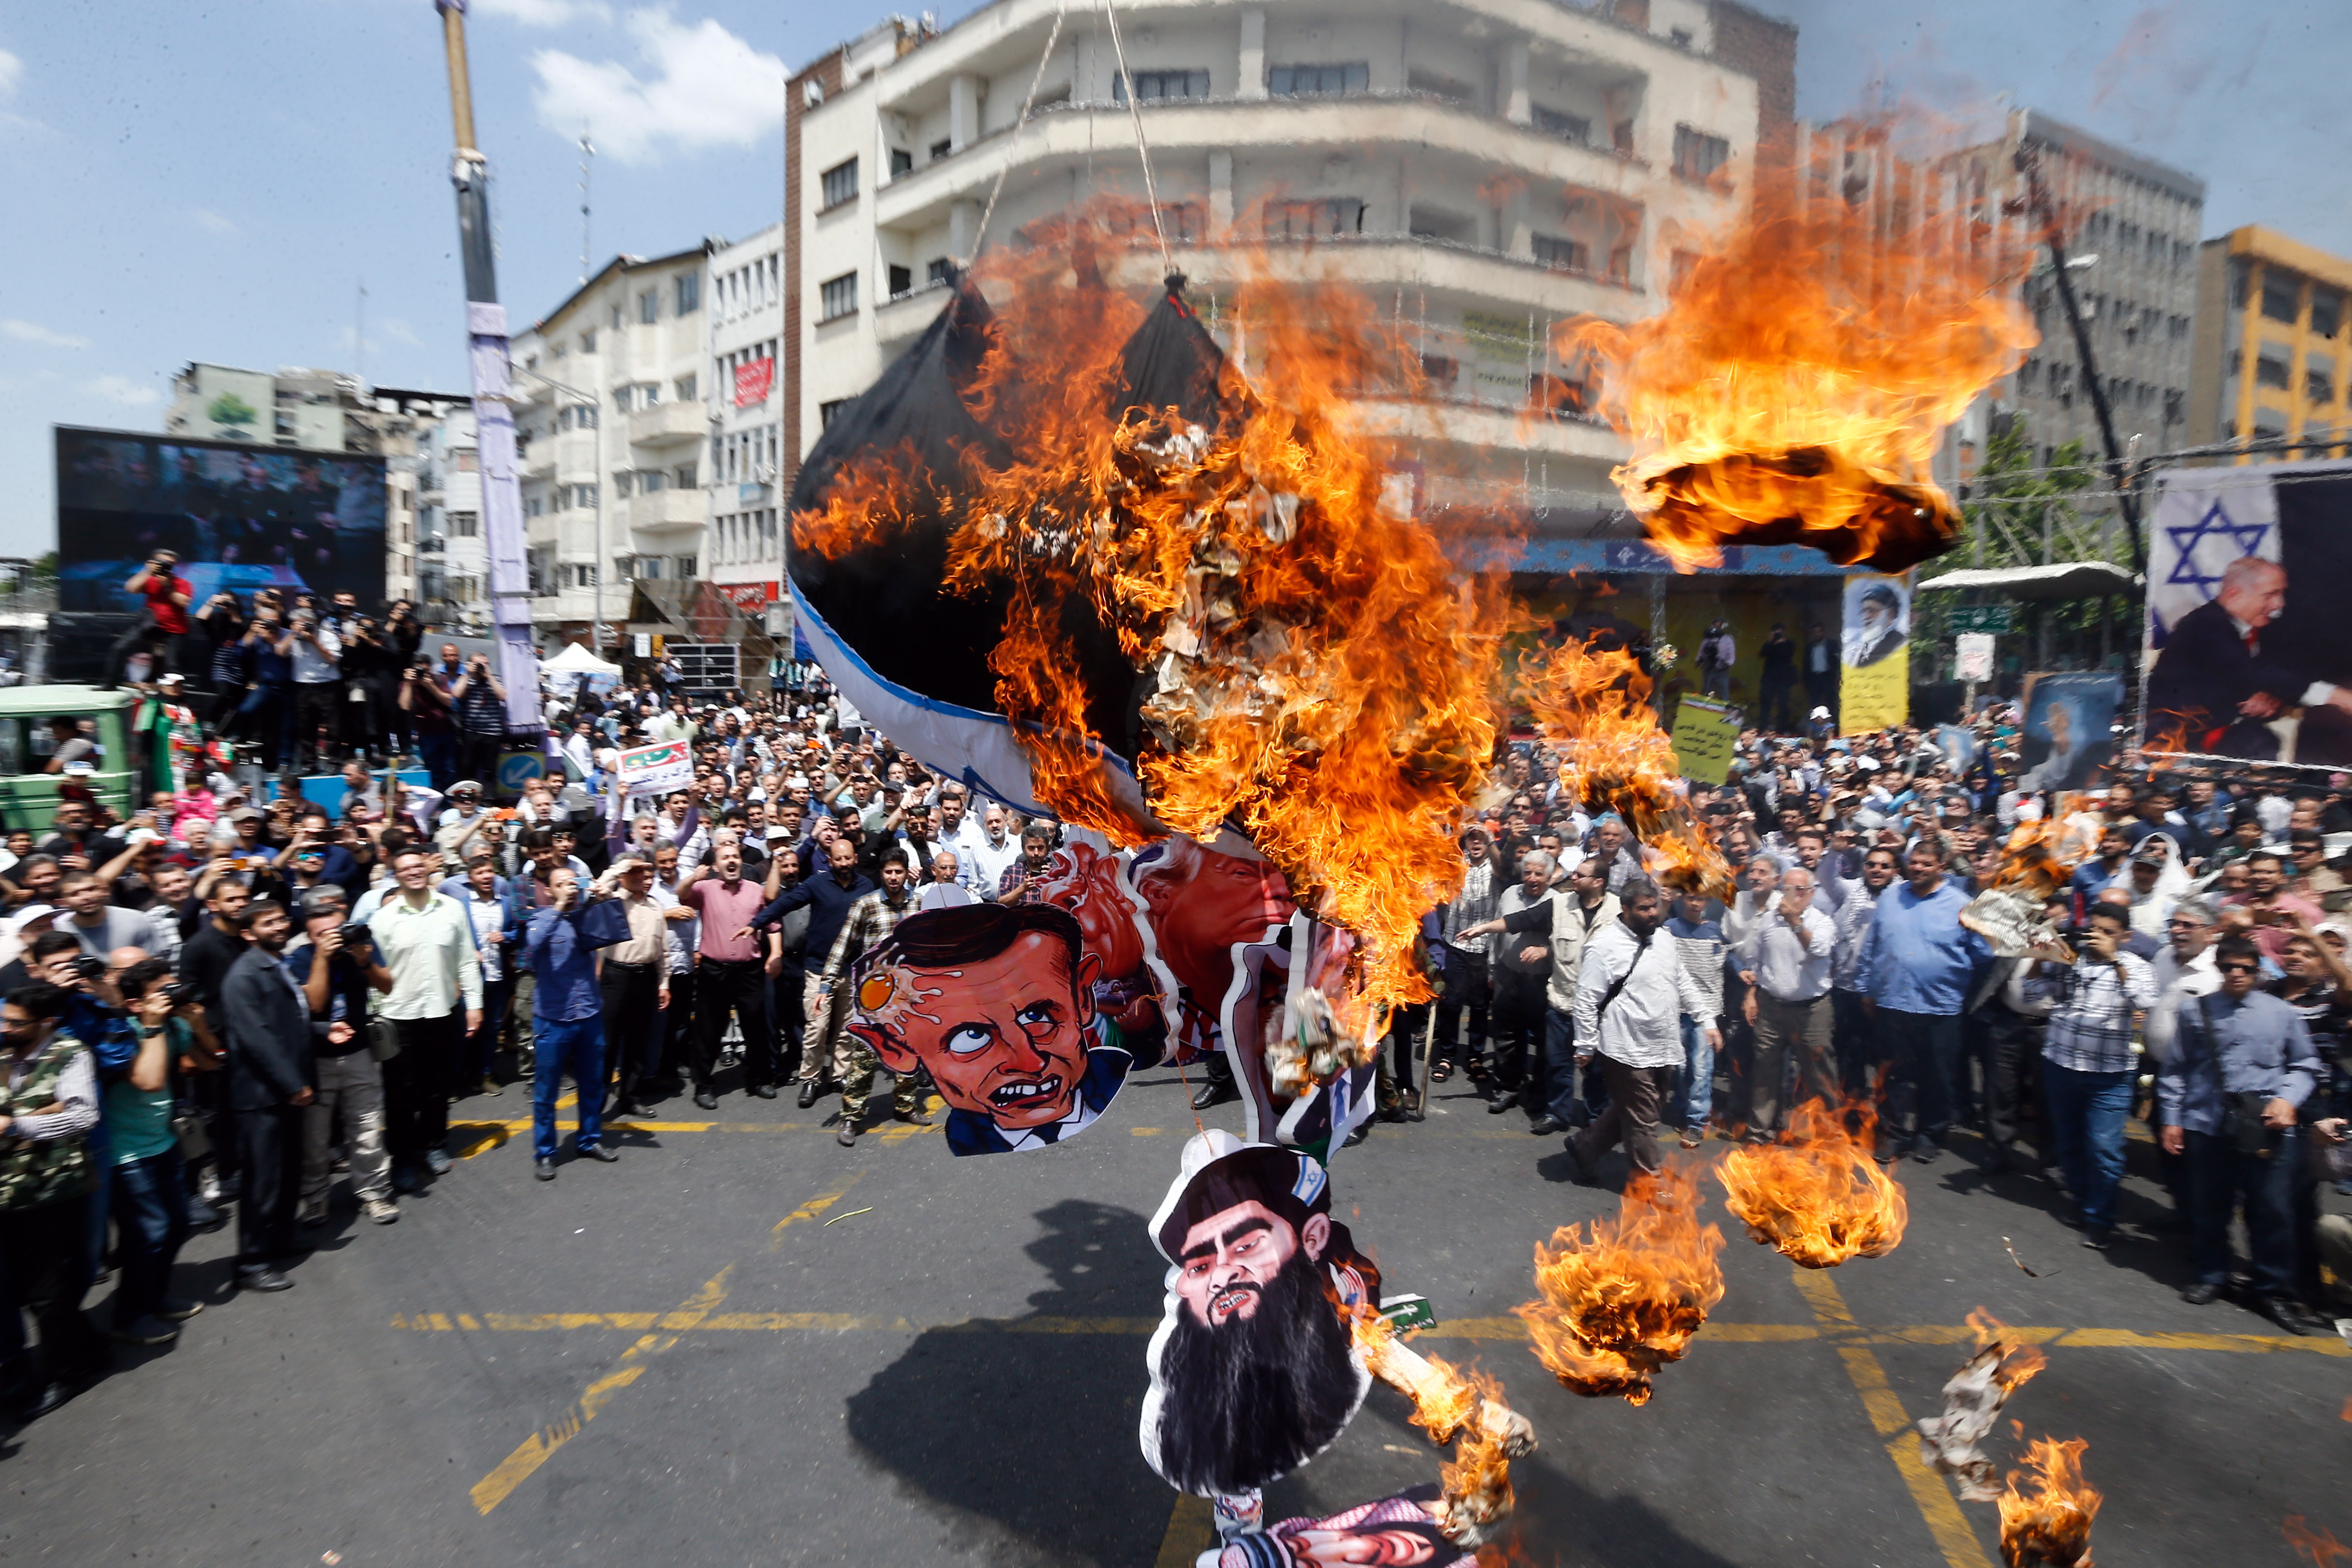 epa07614643 Iranians protesters burn the Israeli flag and an effigy depicting the face of King Salman of Saudi Arabia and others during an anti-Israel rally mark Al Quds Day (Jerusalem Day), in support of Palestinian resistance against on the Israeli occupation, in Tehran, Iran, 31 May 2019. Quds Day was started by the late Ayatollah Khomeini, founder of the Islamic Iranian republic, who called on the world's Muslims to show solidarity with Palestinians on the last Friday of the fasting month of Ramadan.  EPA/ABEDIN TAHERKENAREH